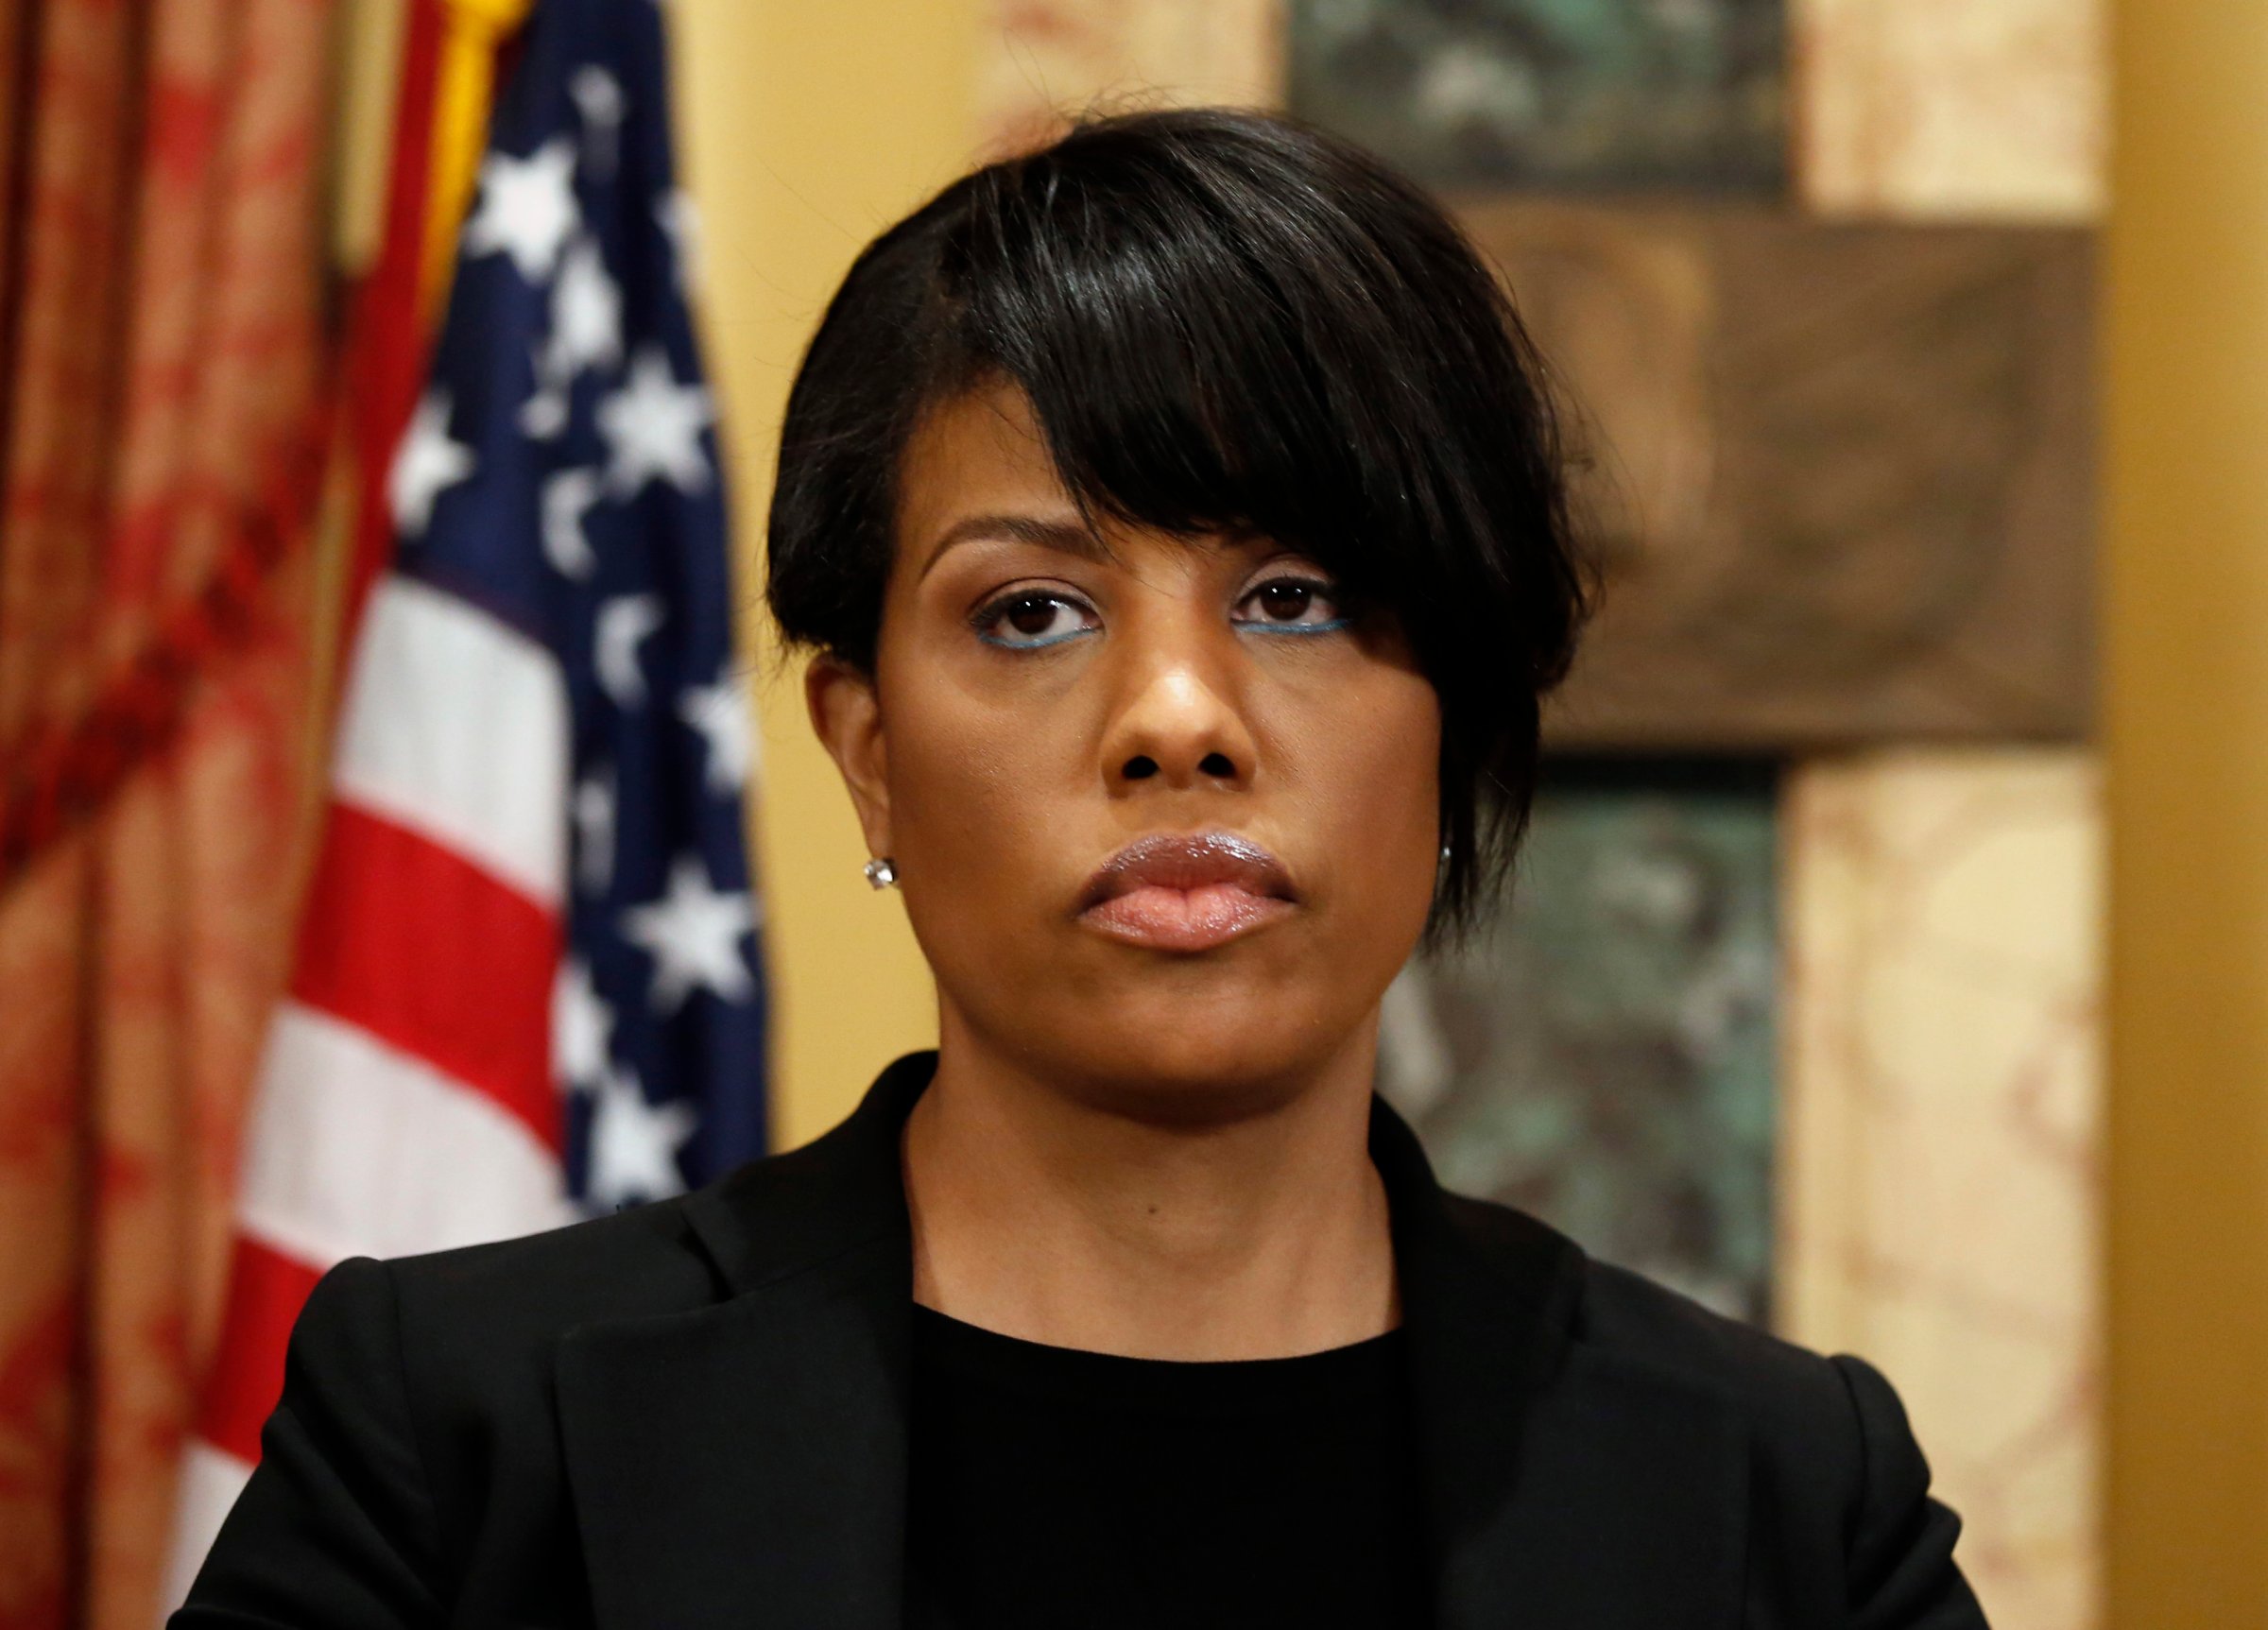 Mayor Stephanie Rawlings-Blake prepares to speak at a media availability at City Hall, on May 1, 2015 in Baltimore.